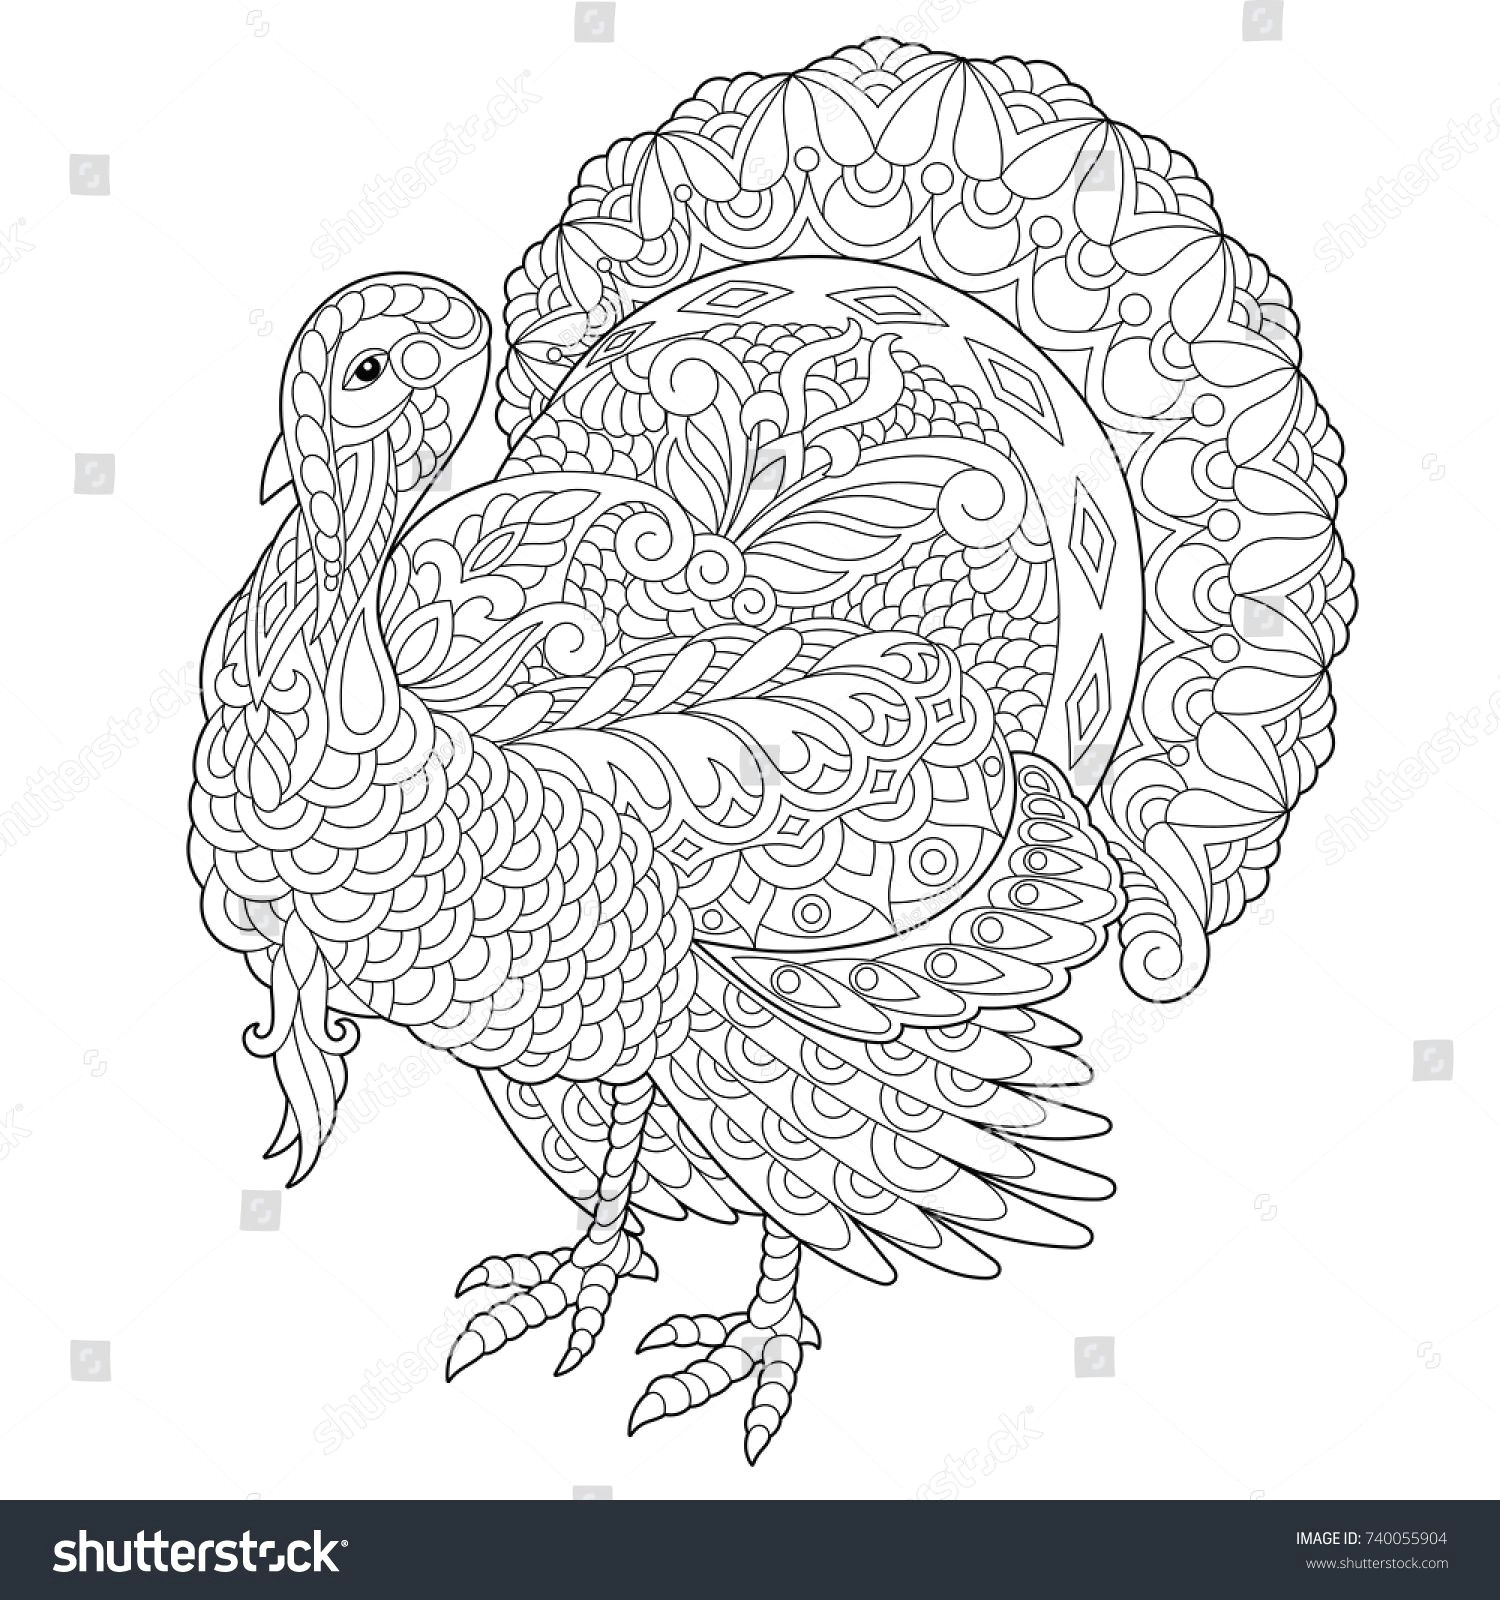 Turkey Animal Drawing Coloring Page Of Turkey for Thanksgiving Day Greeting Card